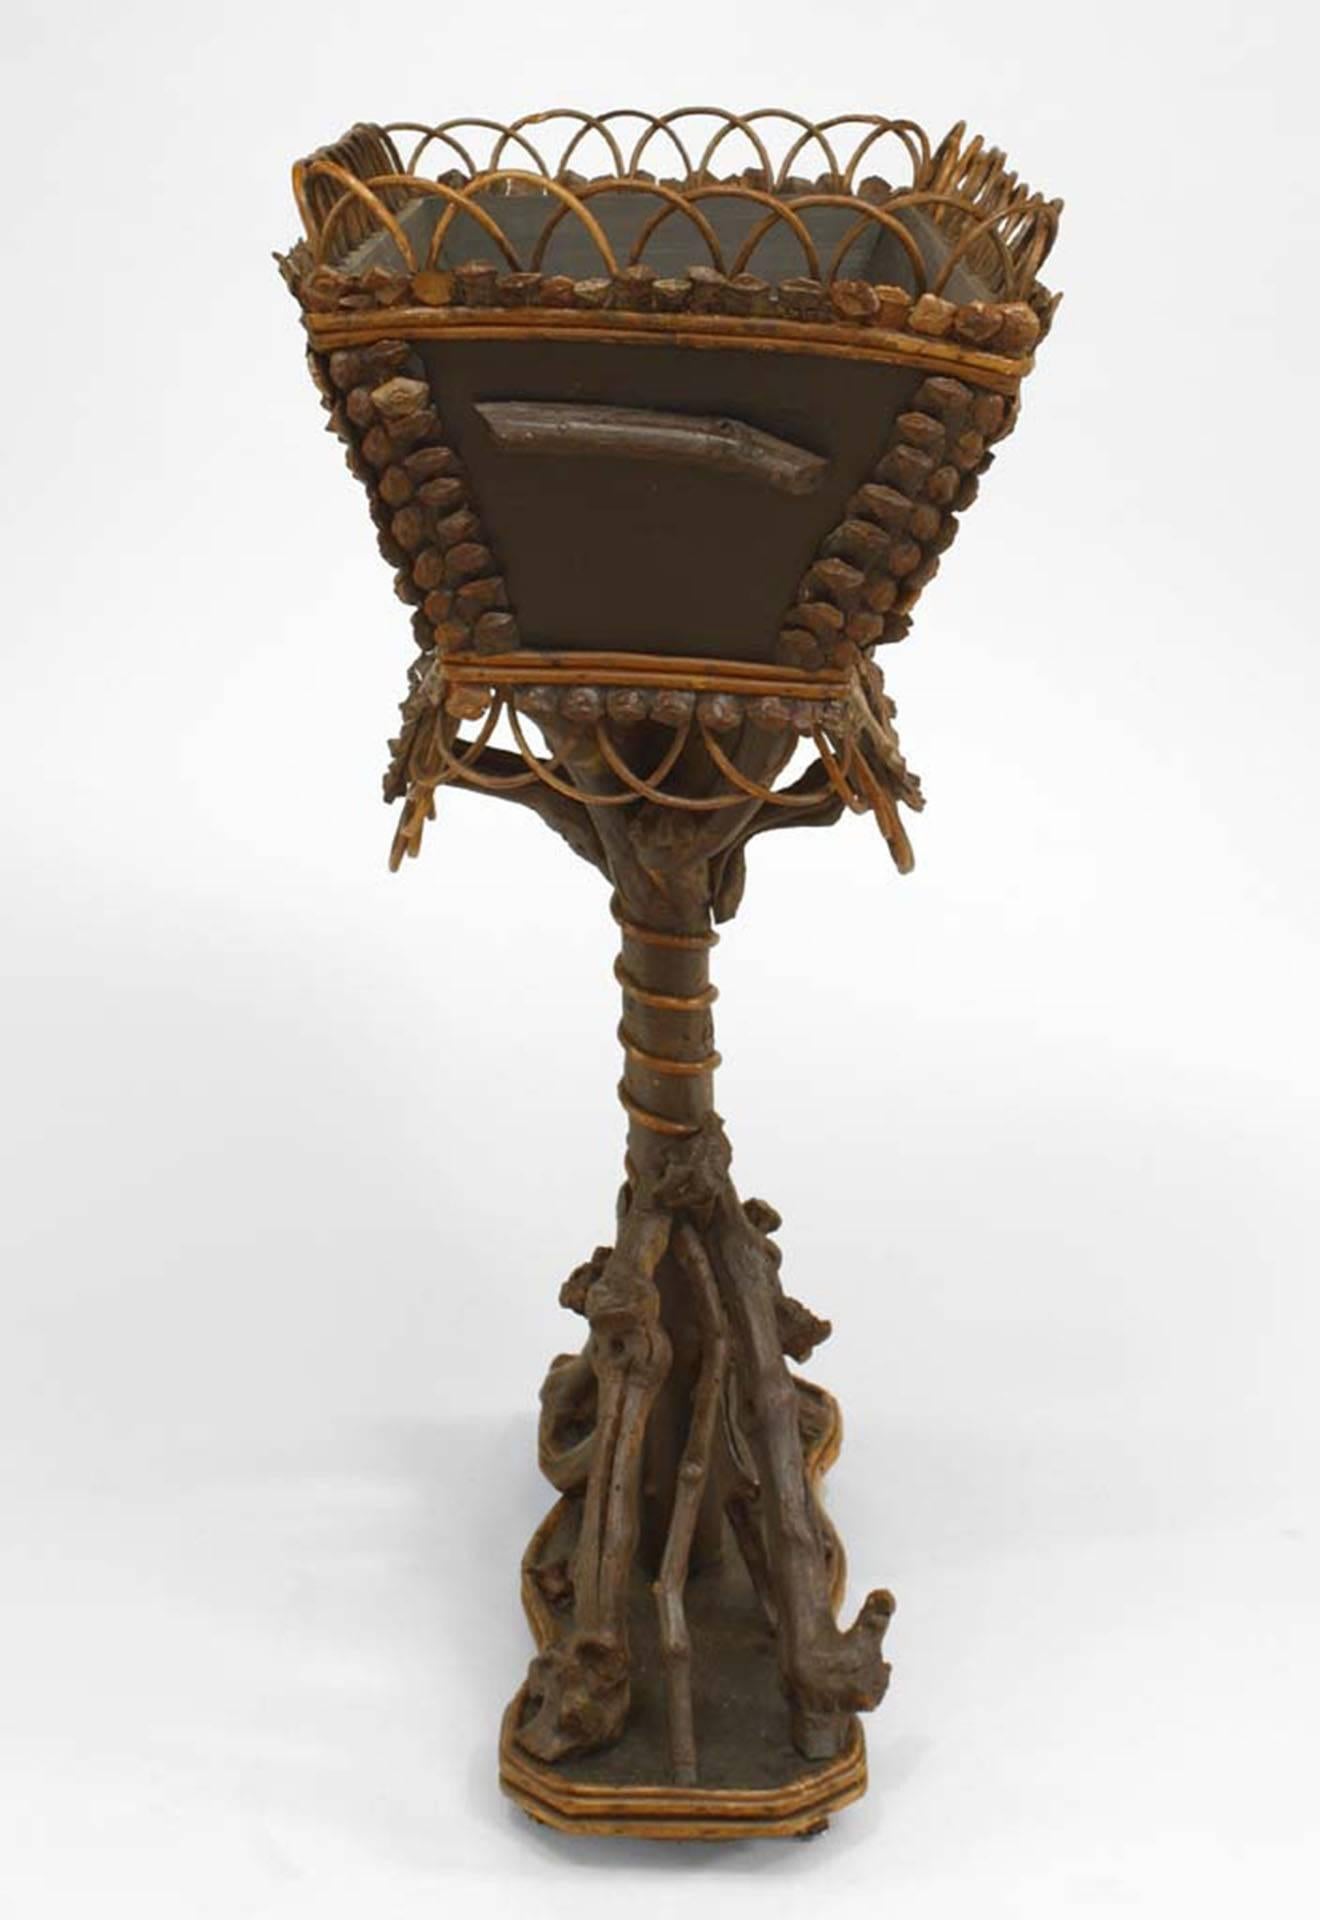 Rustic Continental (19th Cent) twig and root rectangular top fernery with filigree gallery on pedestal base with applied decoration.
